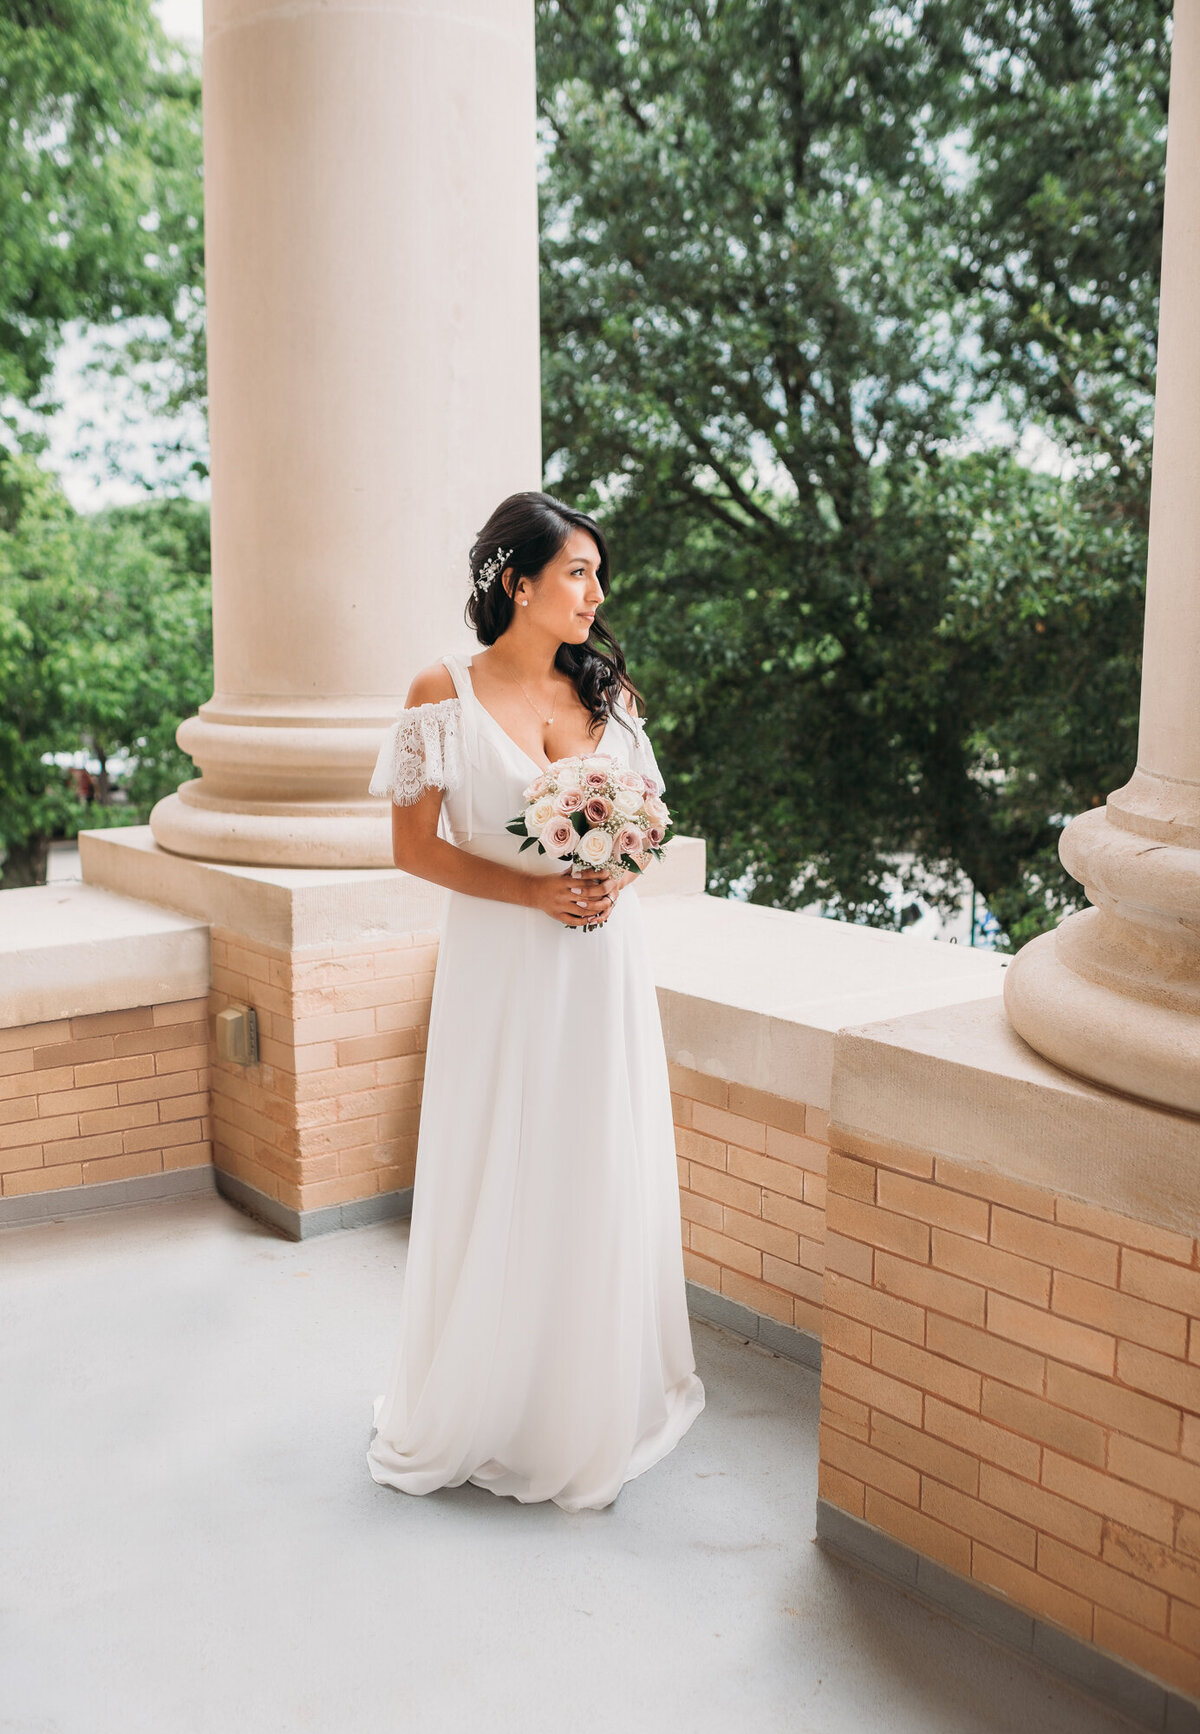 Couples Photography, Woman in a wedding dress stands on a patio and looks off into the distance holding a small flower bouquet.